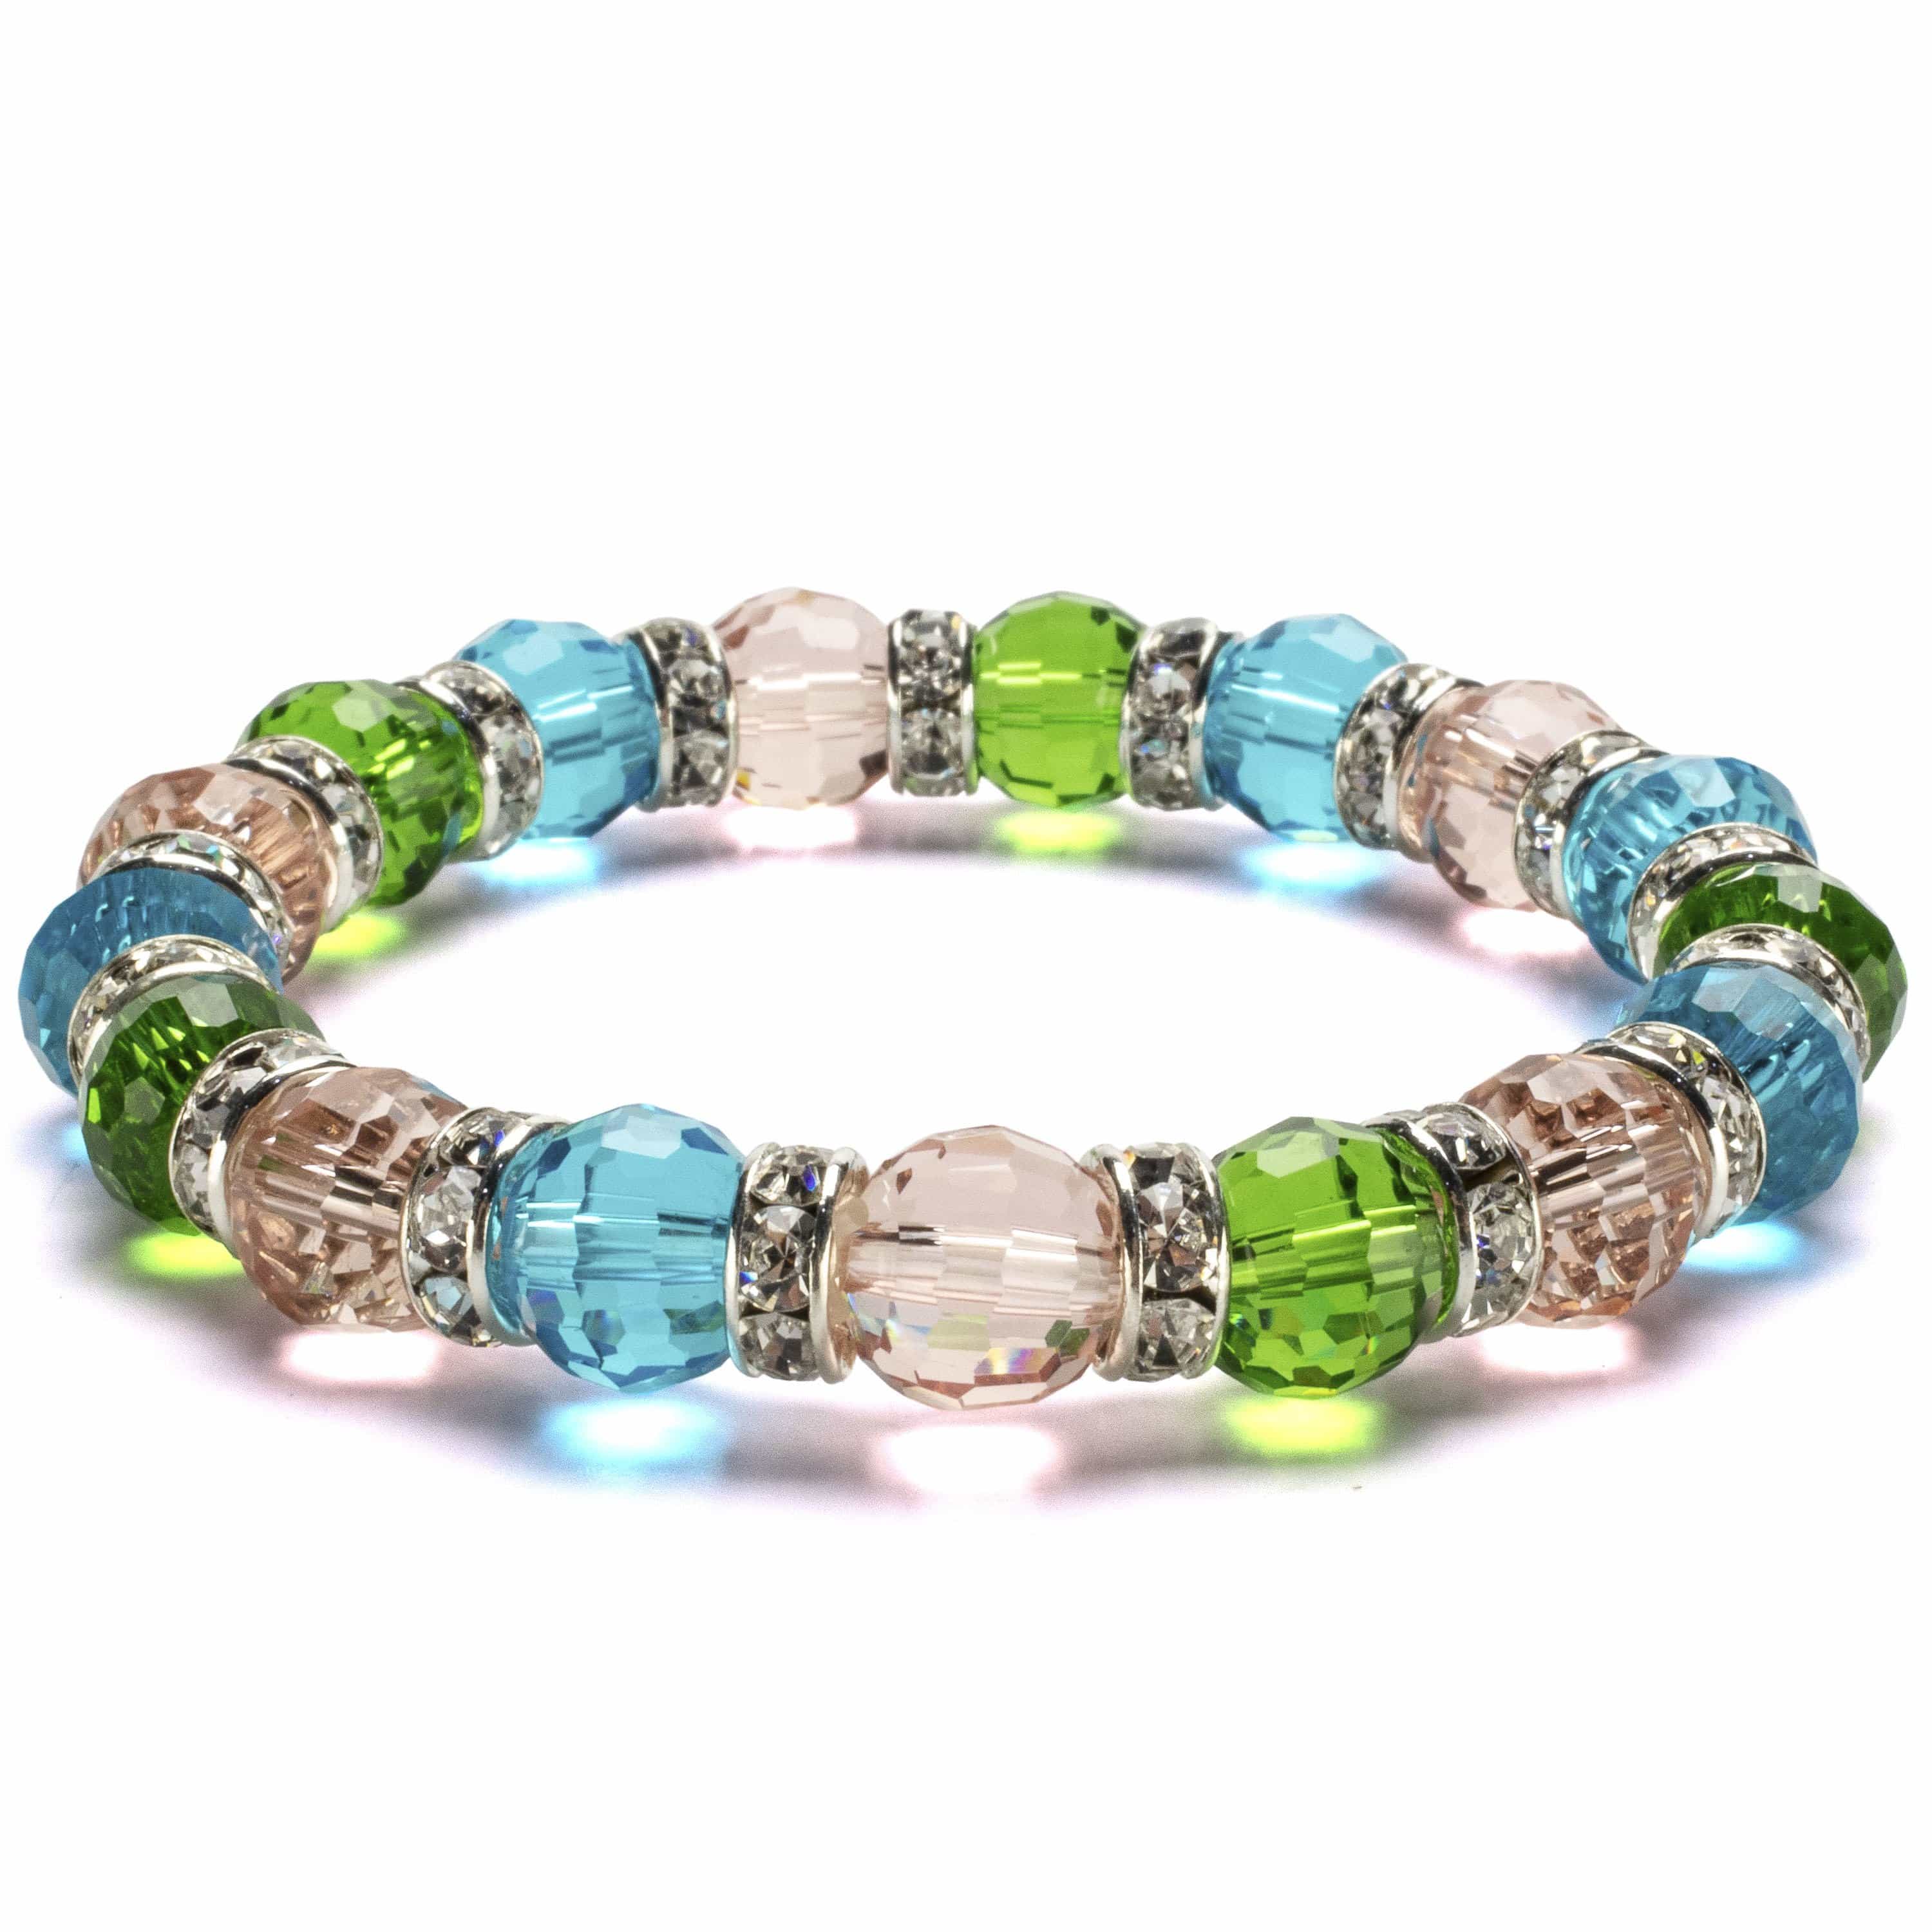 Kalifano Gorgeous Glass Jewelry Multicolored Gorgeous Glass Bracelet with Cubic Zirconia Crystals BLUE-BGG-N03